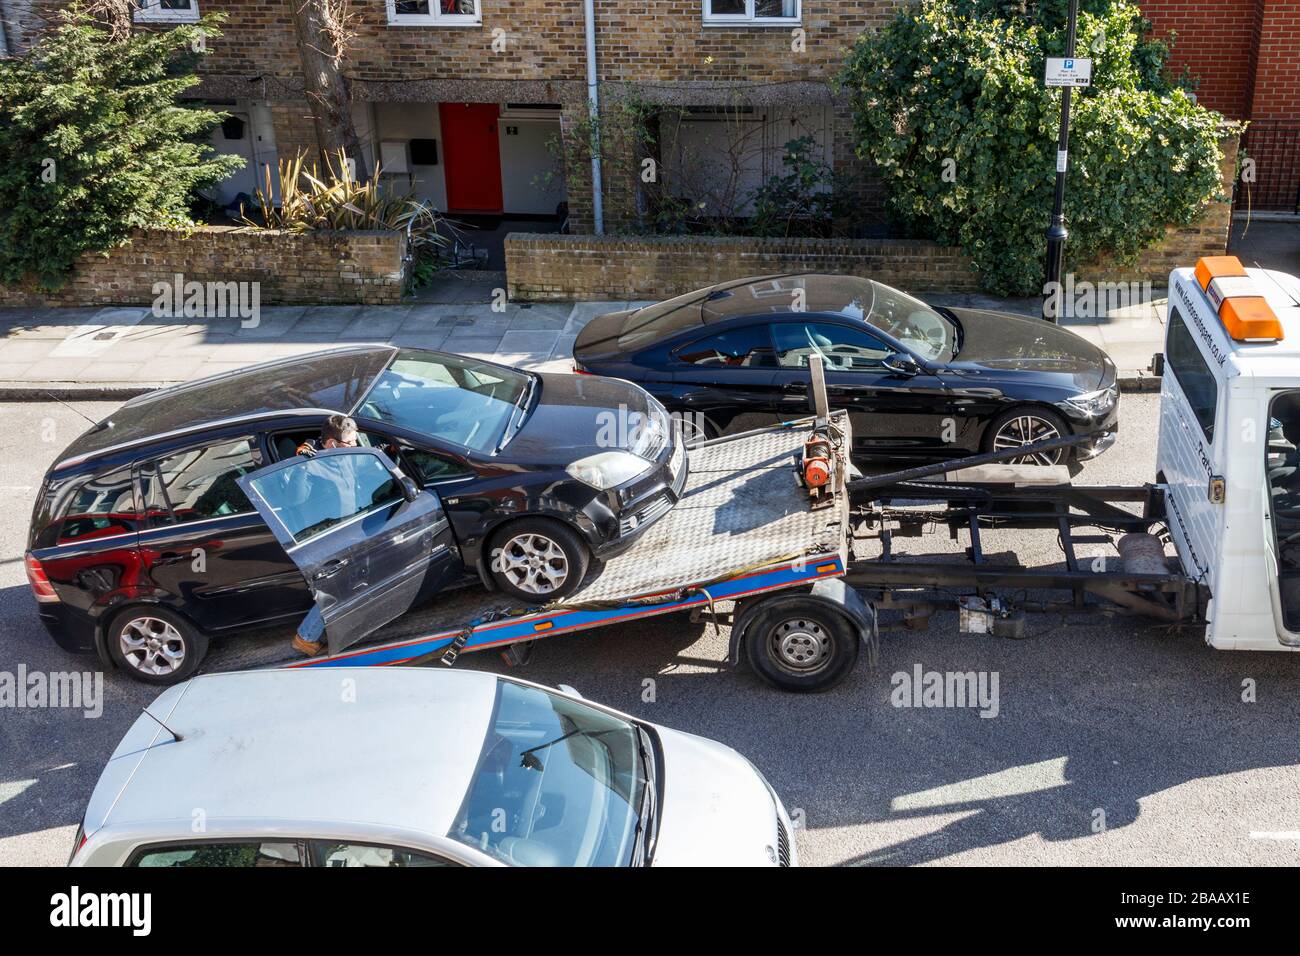 A car being winched onto the back of a recovery truck in a residential street in North London, UK Stock Photo